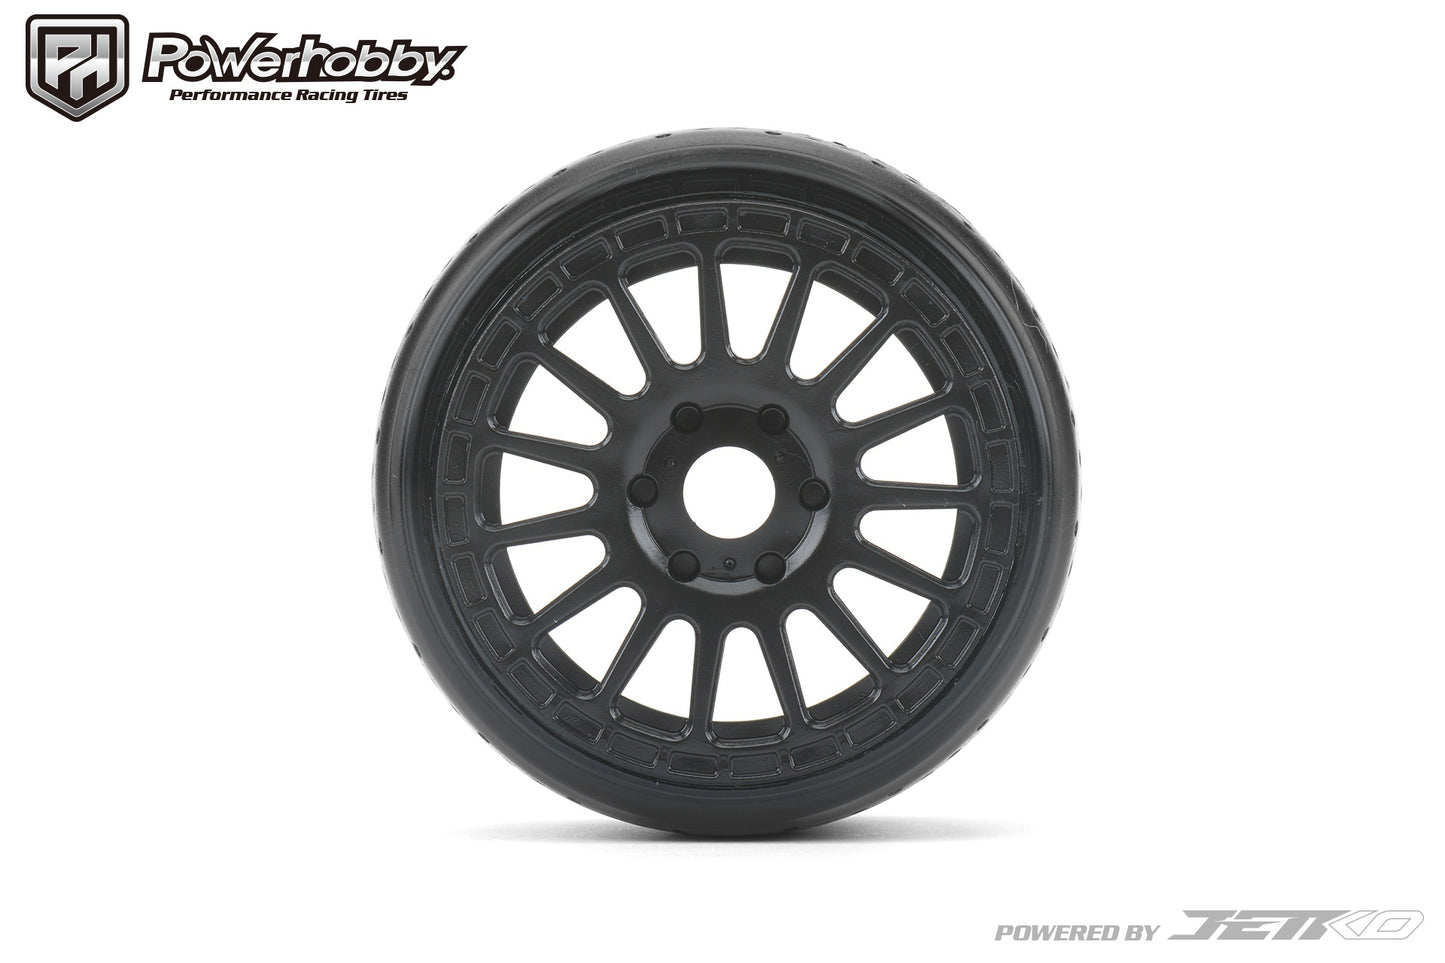 Powerhobby 1/8 GT Hot Dot Belted Mounted Tires 17mm Super Soft Compound Radial Wheels